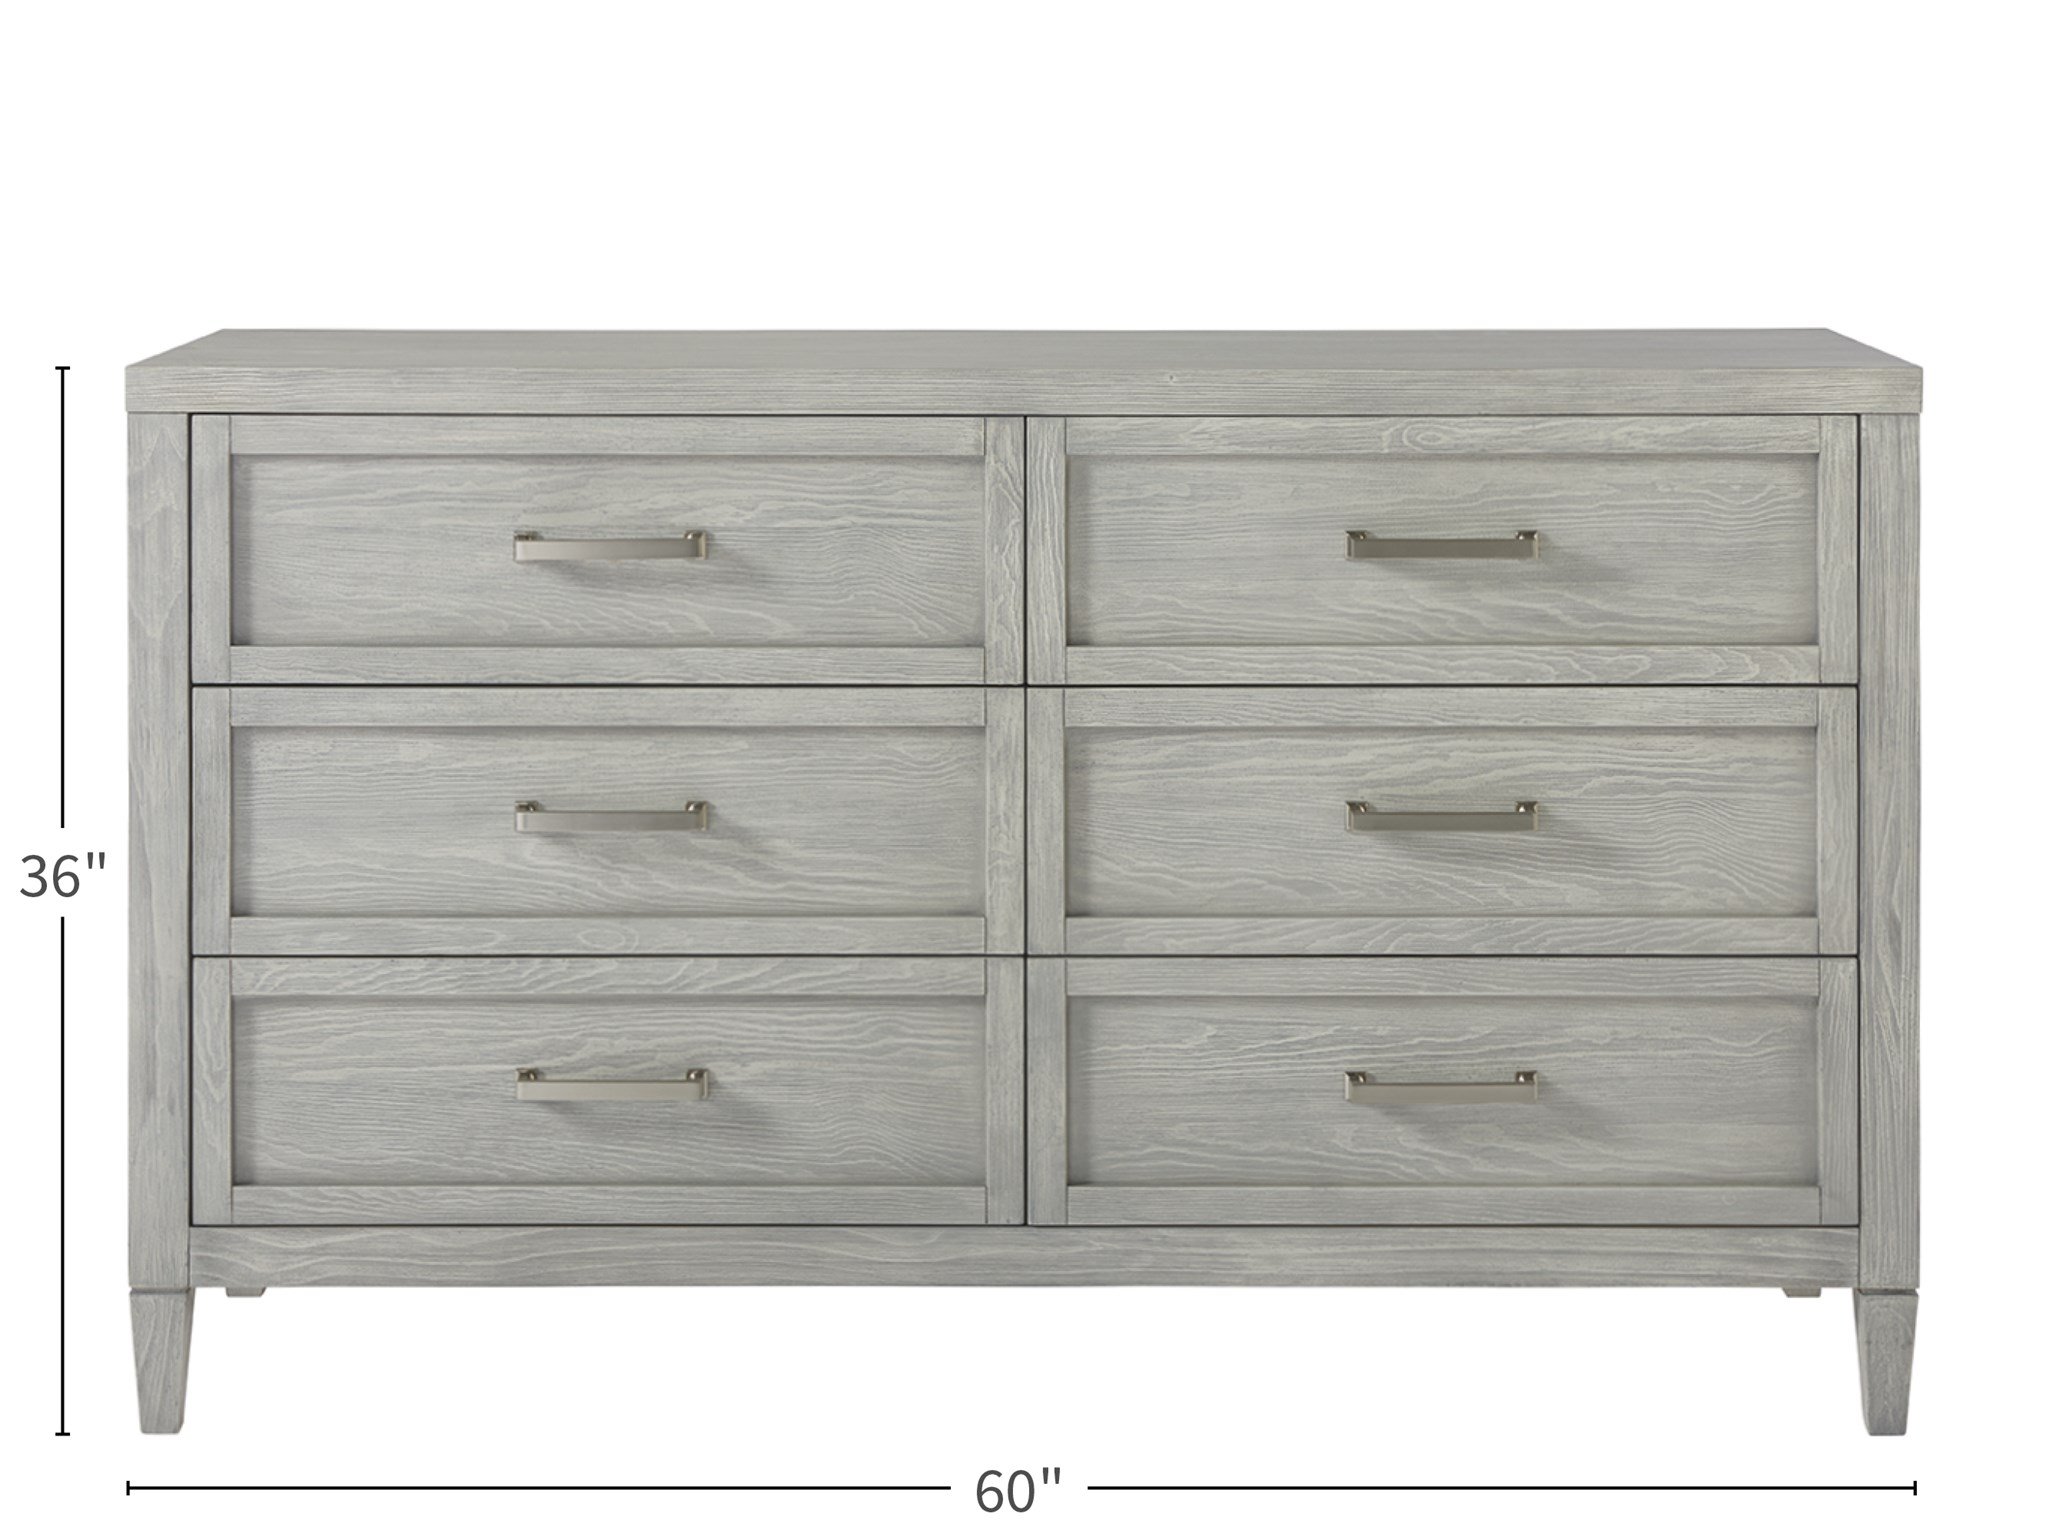 Small Space Dresser